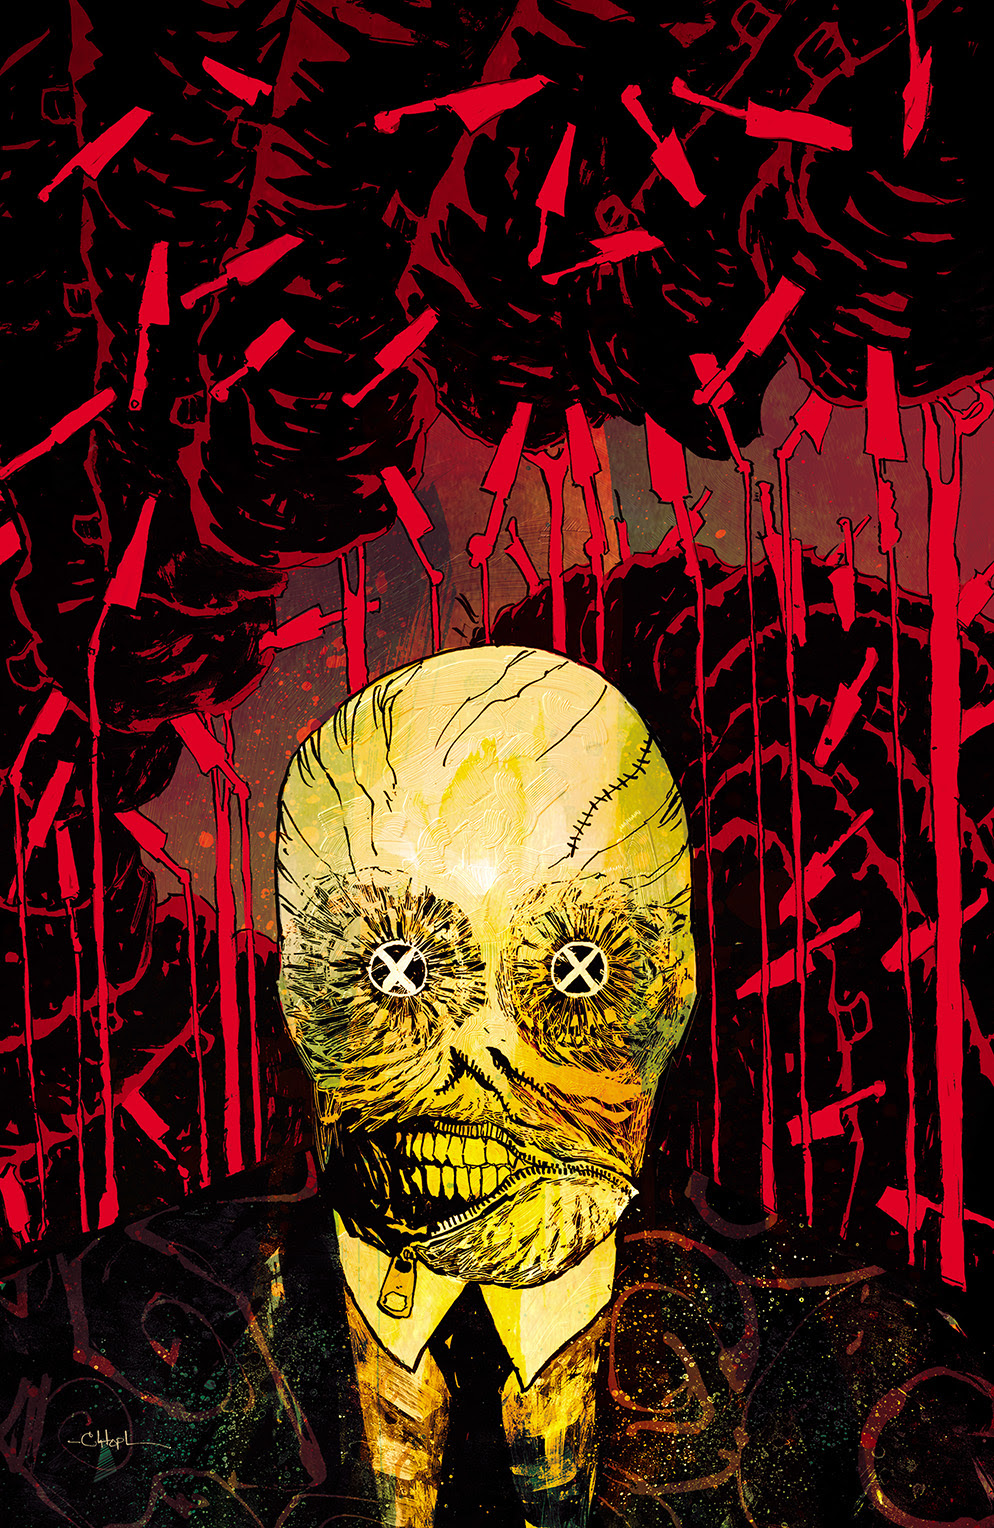 CLIVE BARKER'S NIGHTBREED #8 Cover B by Christopher Mitten